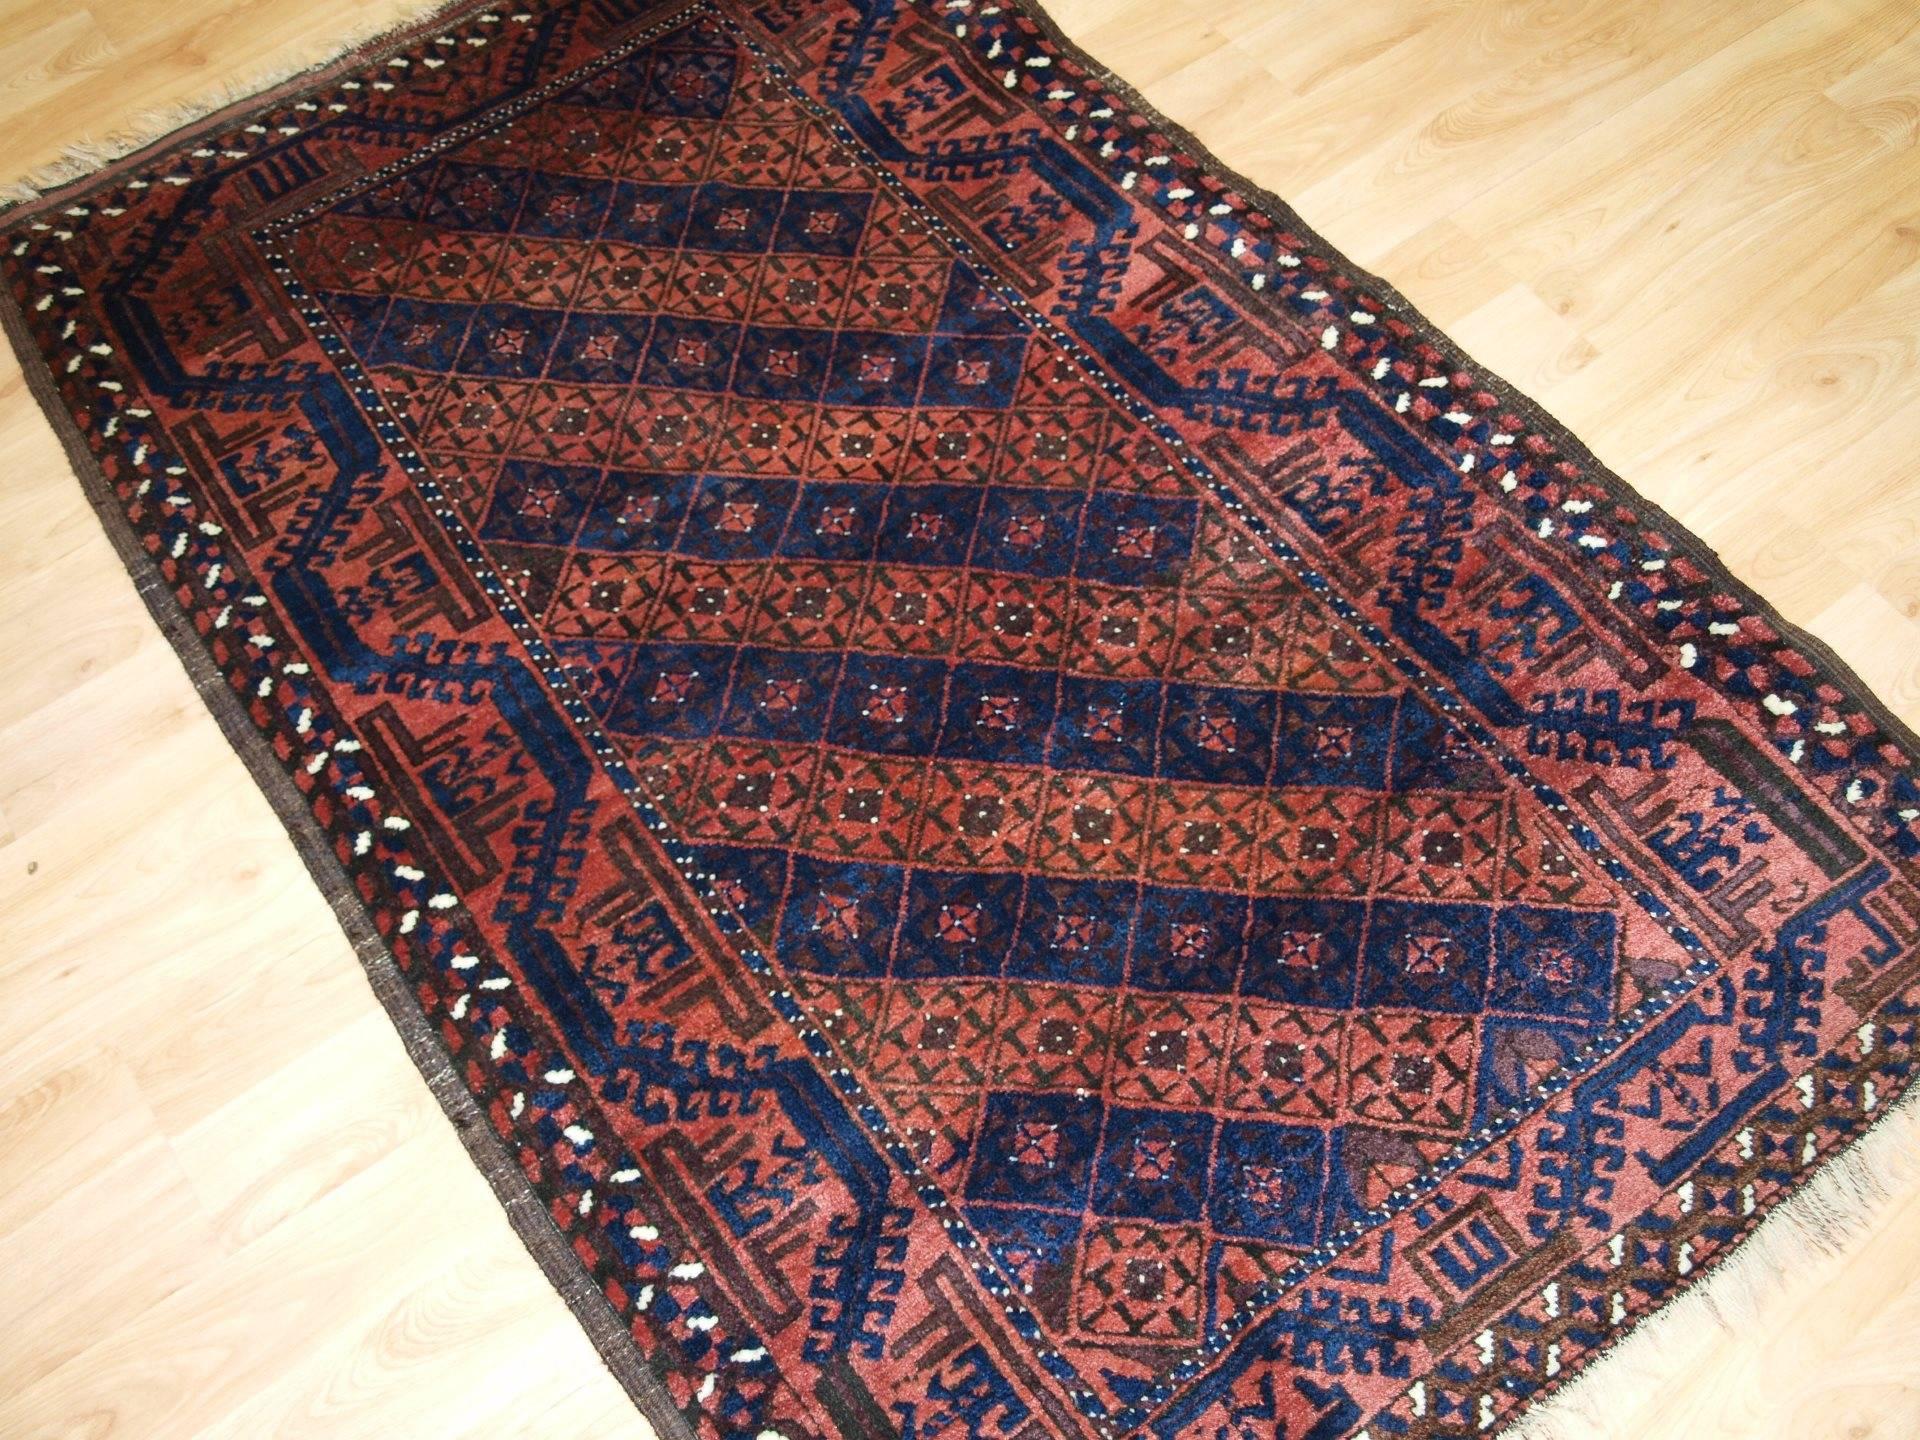 Antique Persian Baluch rug, diamond lattice design, great condition, circa 1900.
Size: 5ft 3in x 3ft 3in (160 x 100cm).

Antique Persian Baluch rug from Eastern Persia. 

  

A good Baluch rug with a diamond lattice design in alternate rows